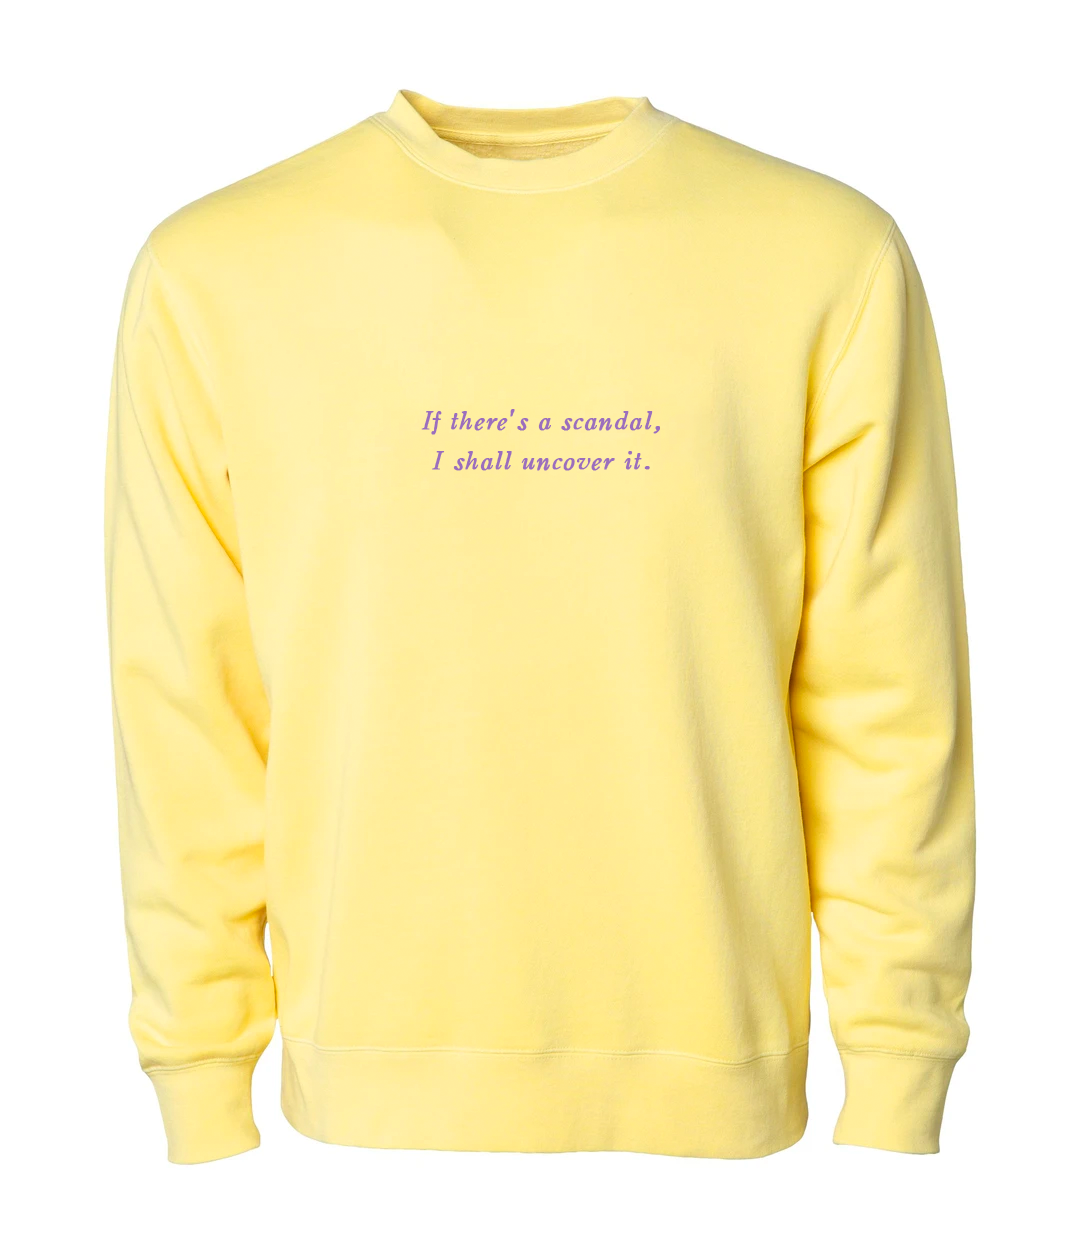 "If There's a Scandal, I Shall Uncover It" Crewneck Sweatshirt